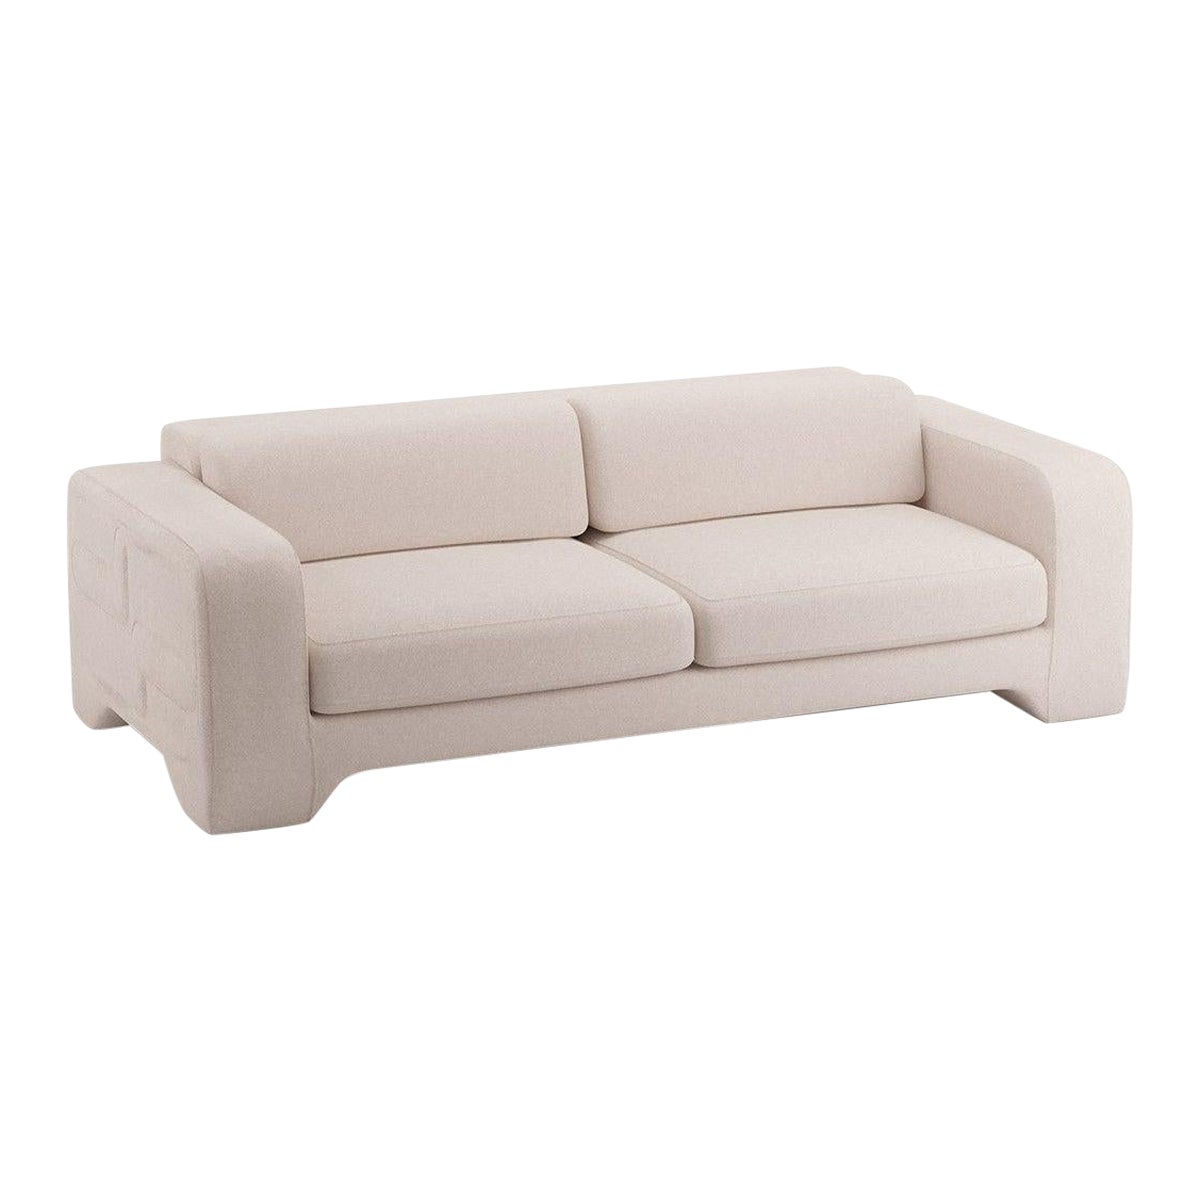 Popus Editions Giovanna 4 Seater Sofa in Natural Cork Linen Upholstery For Sale